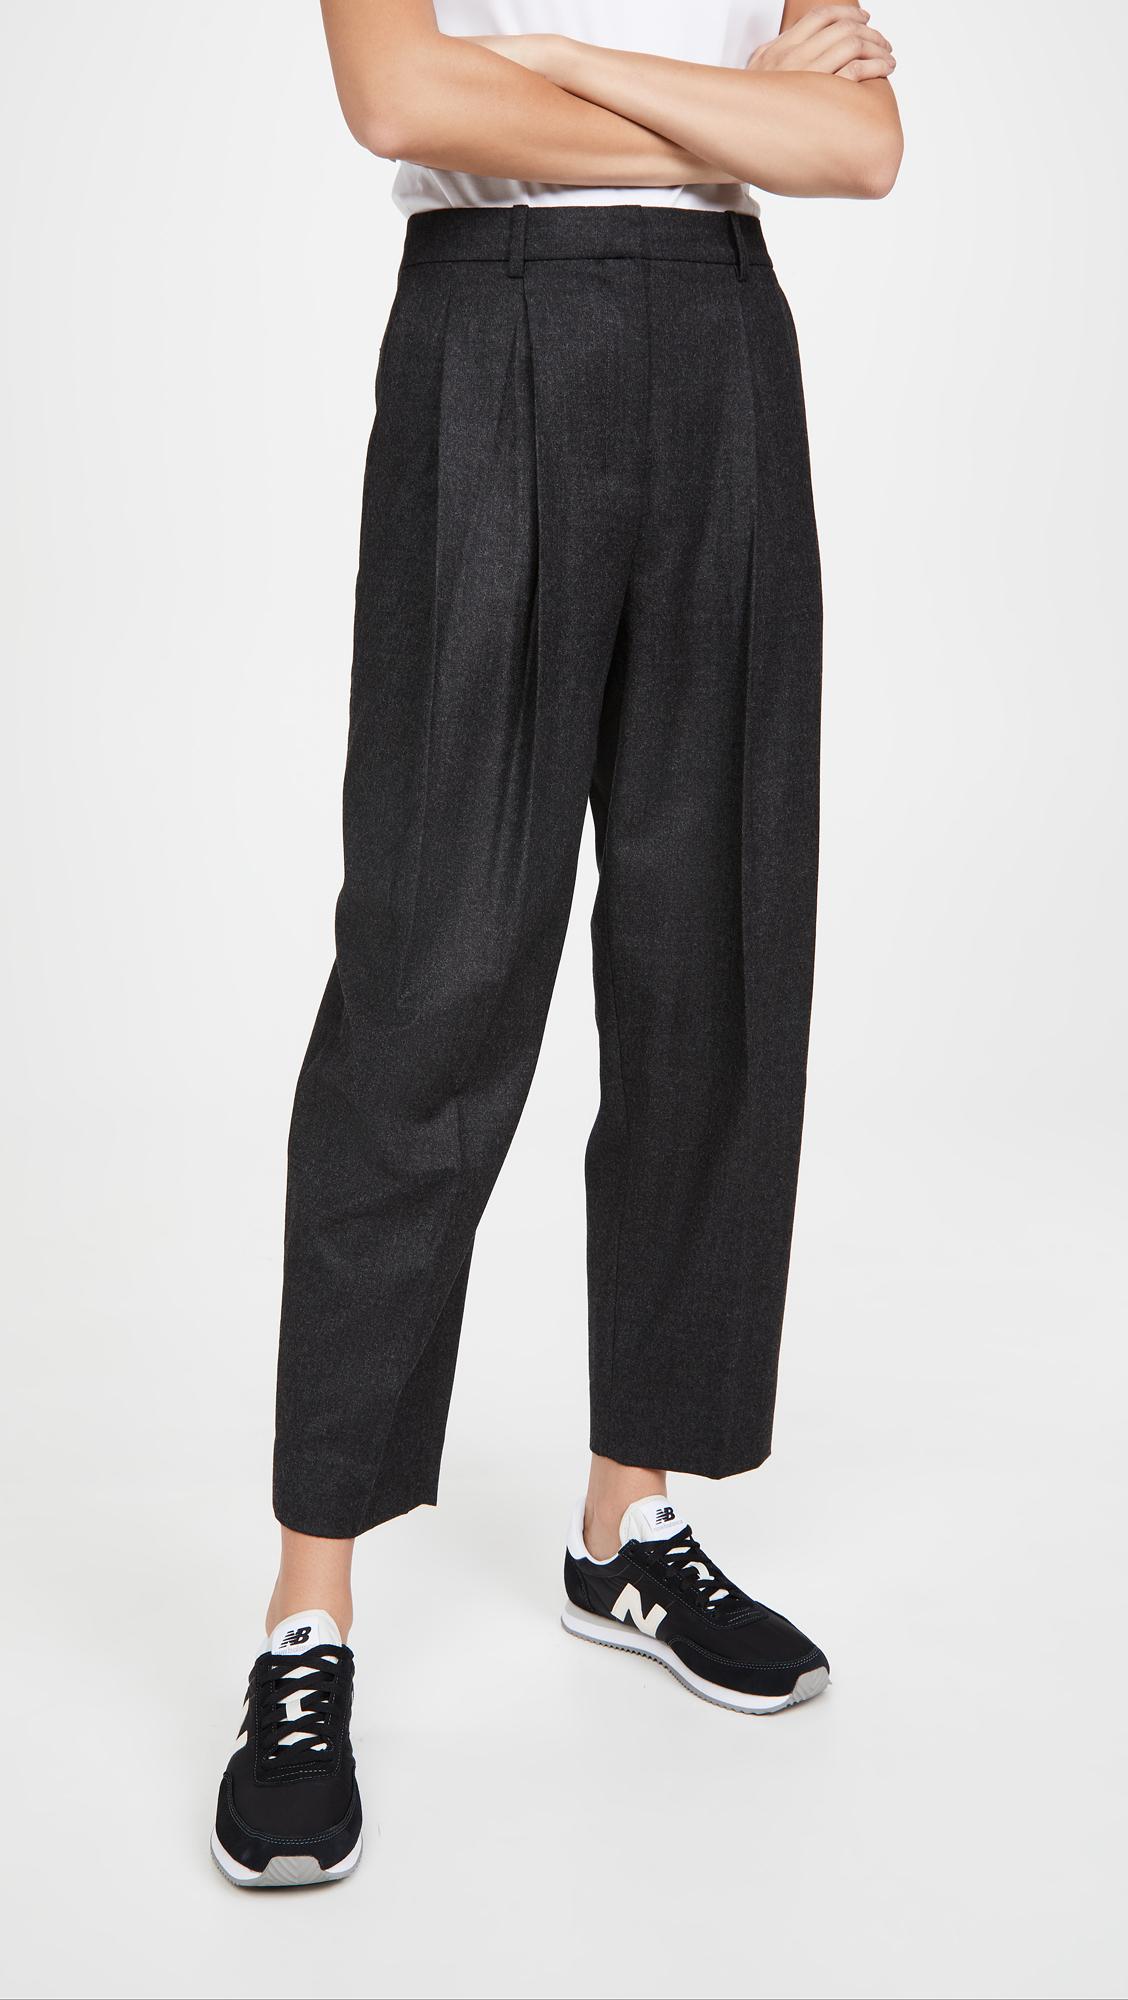 Theory Pleat Carrot Pants in Gray